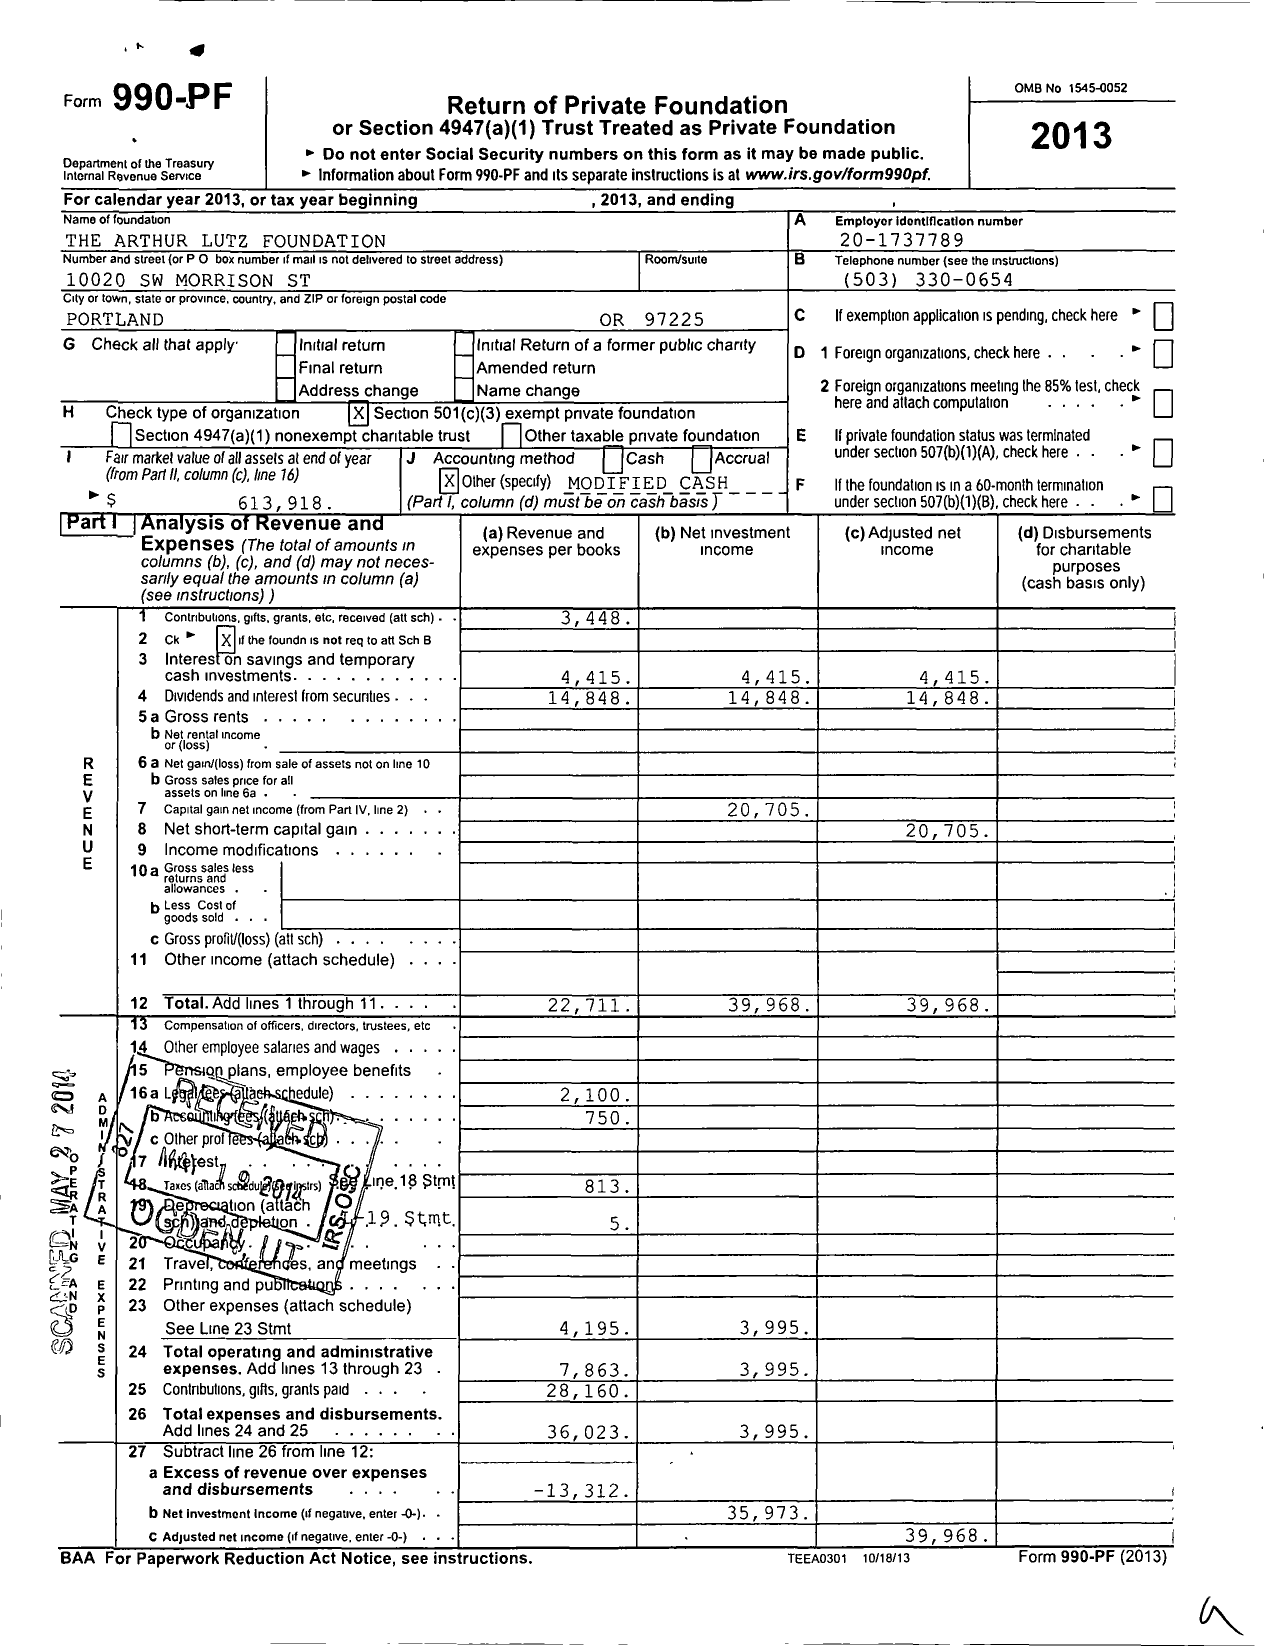 Image of first page of 2013 Form 990PF for The Arthur Lutz Foundation